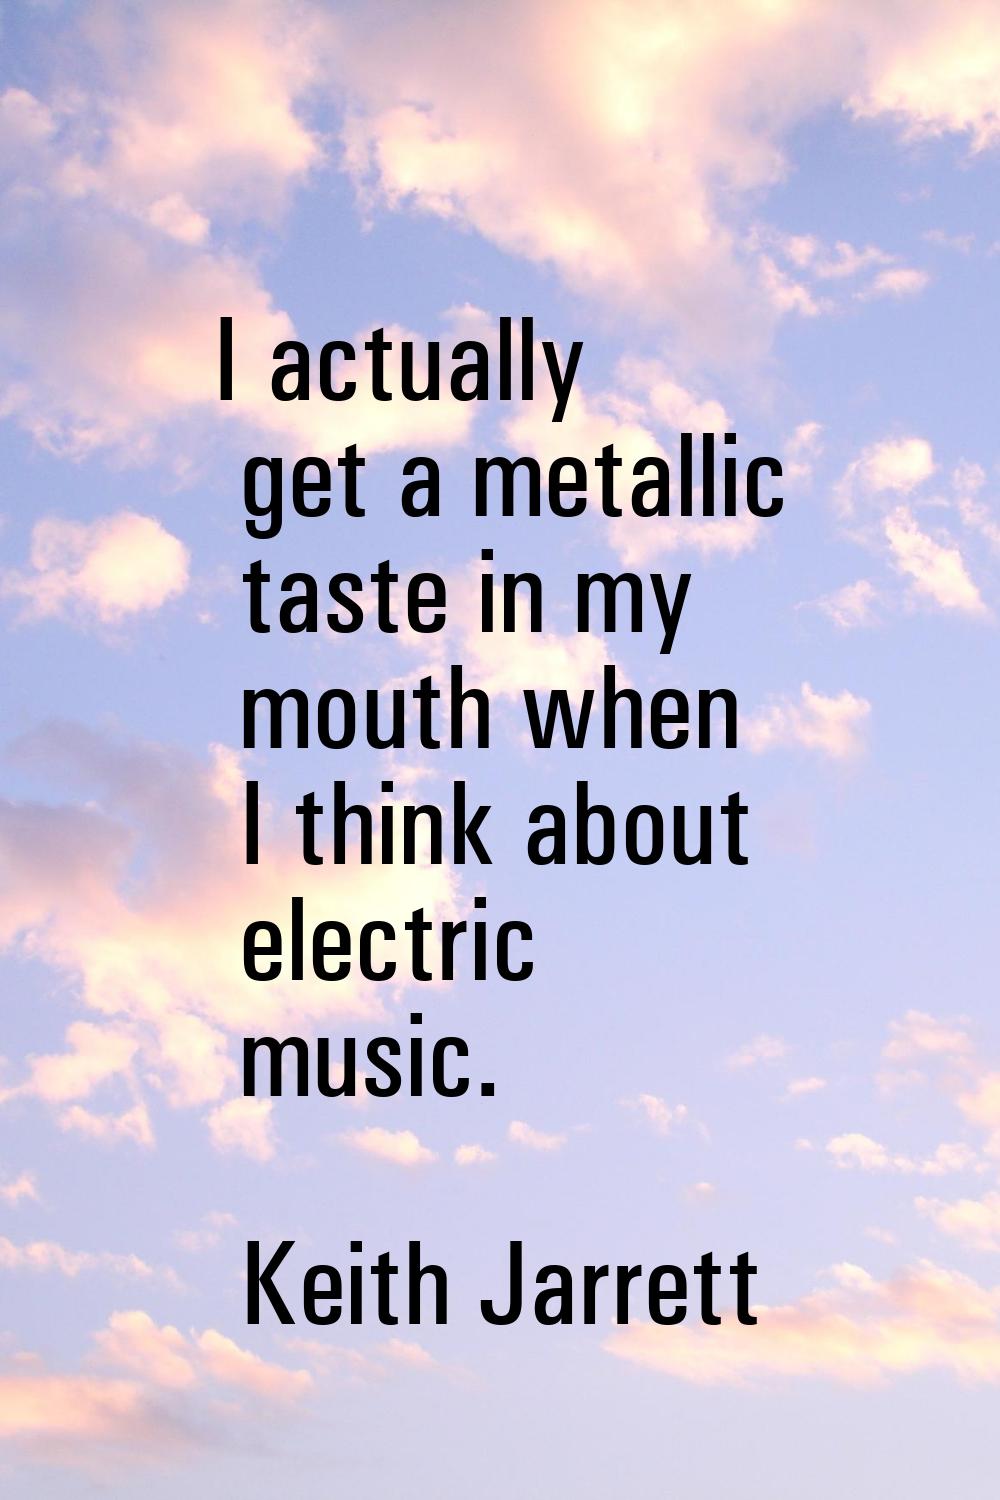 I actually get a metallic taste in my mouth when I think about electric music.